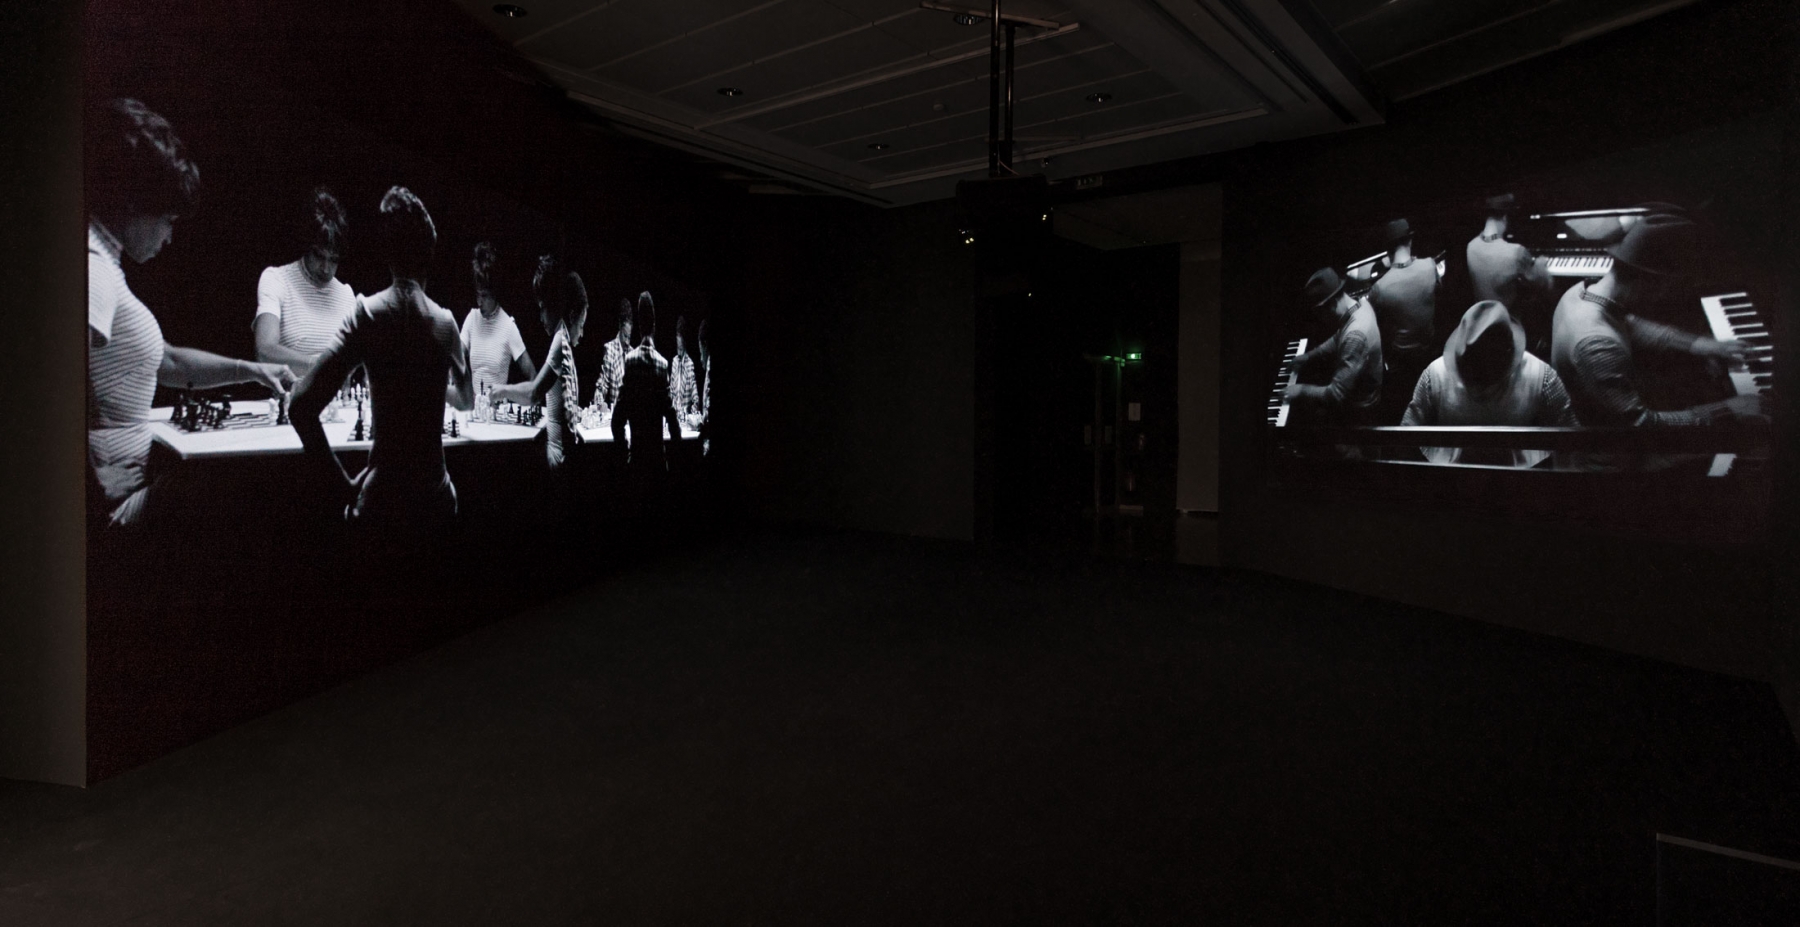 Lorna Simpson
Chess, 2013
HD video installation with three projections, black and white, sound
Duration: 10 minutes, 25 seconds
Musical composition and performance by Jason Moran
Installation view: Jeu de Paume, Paris, 2013
Courtesy of the artist